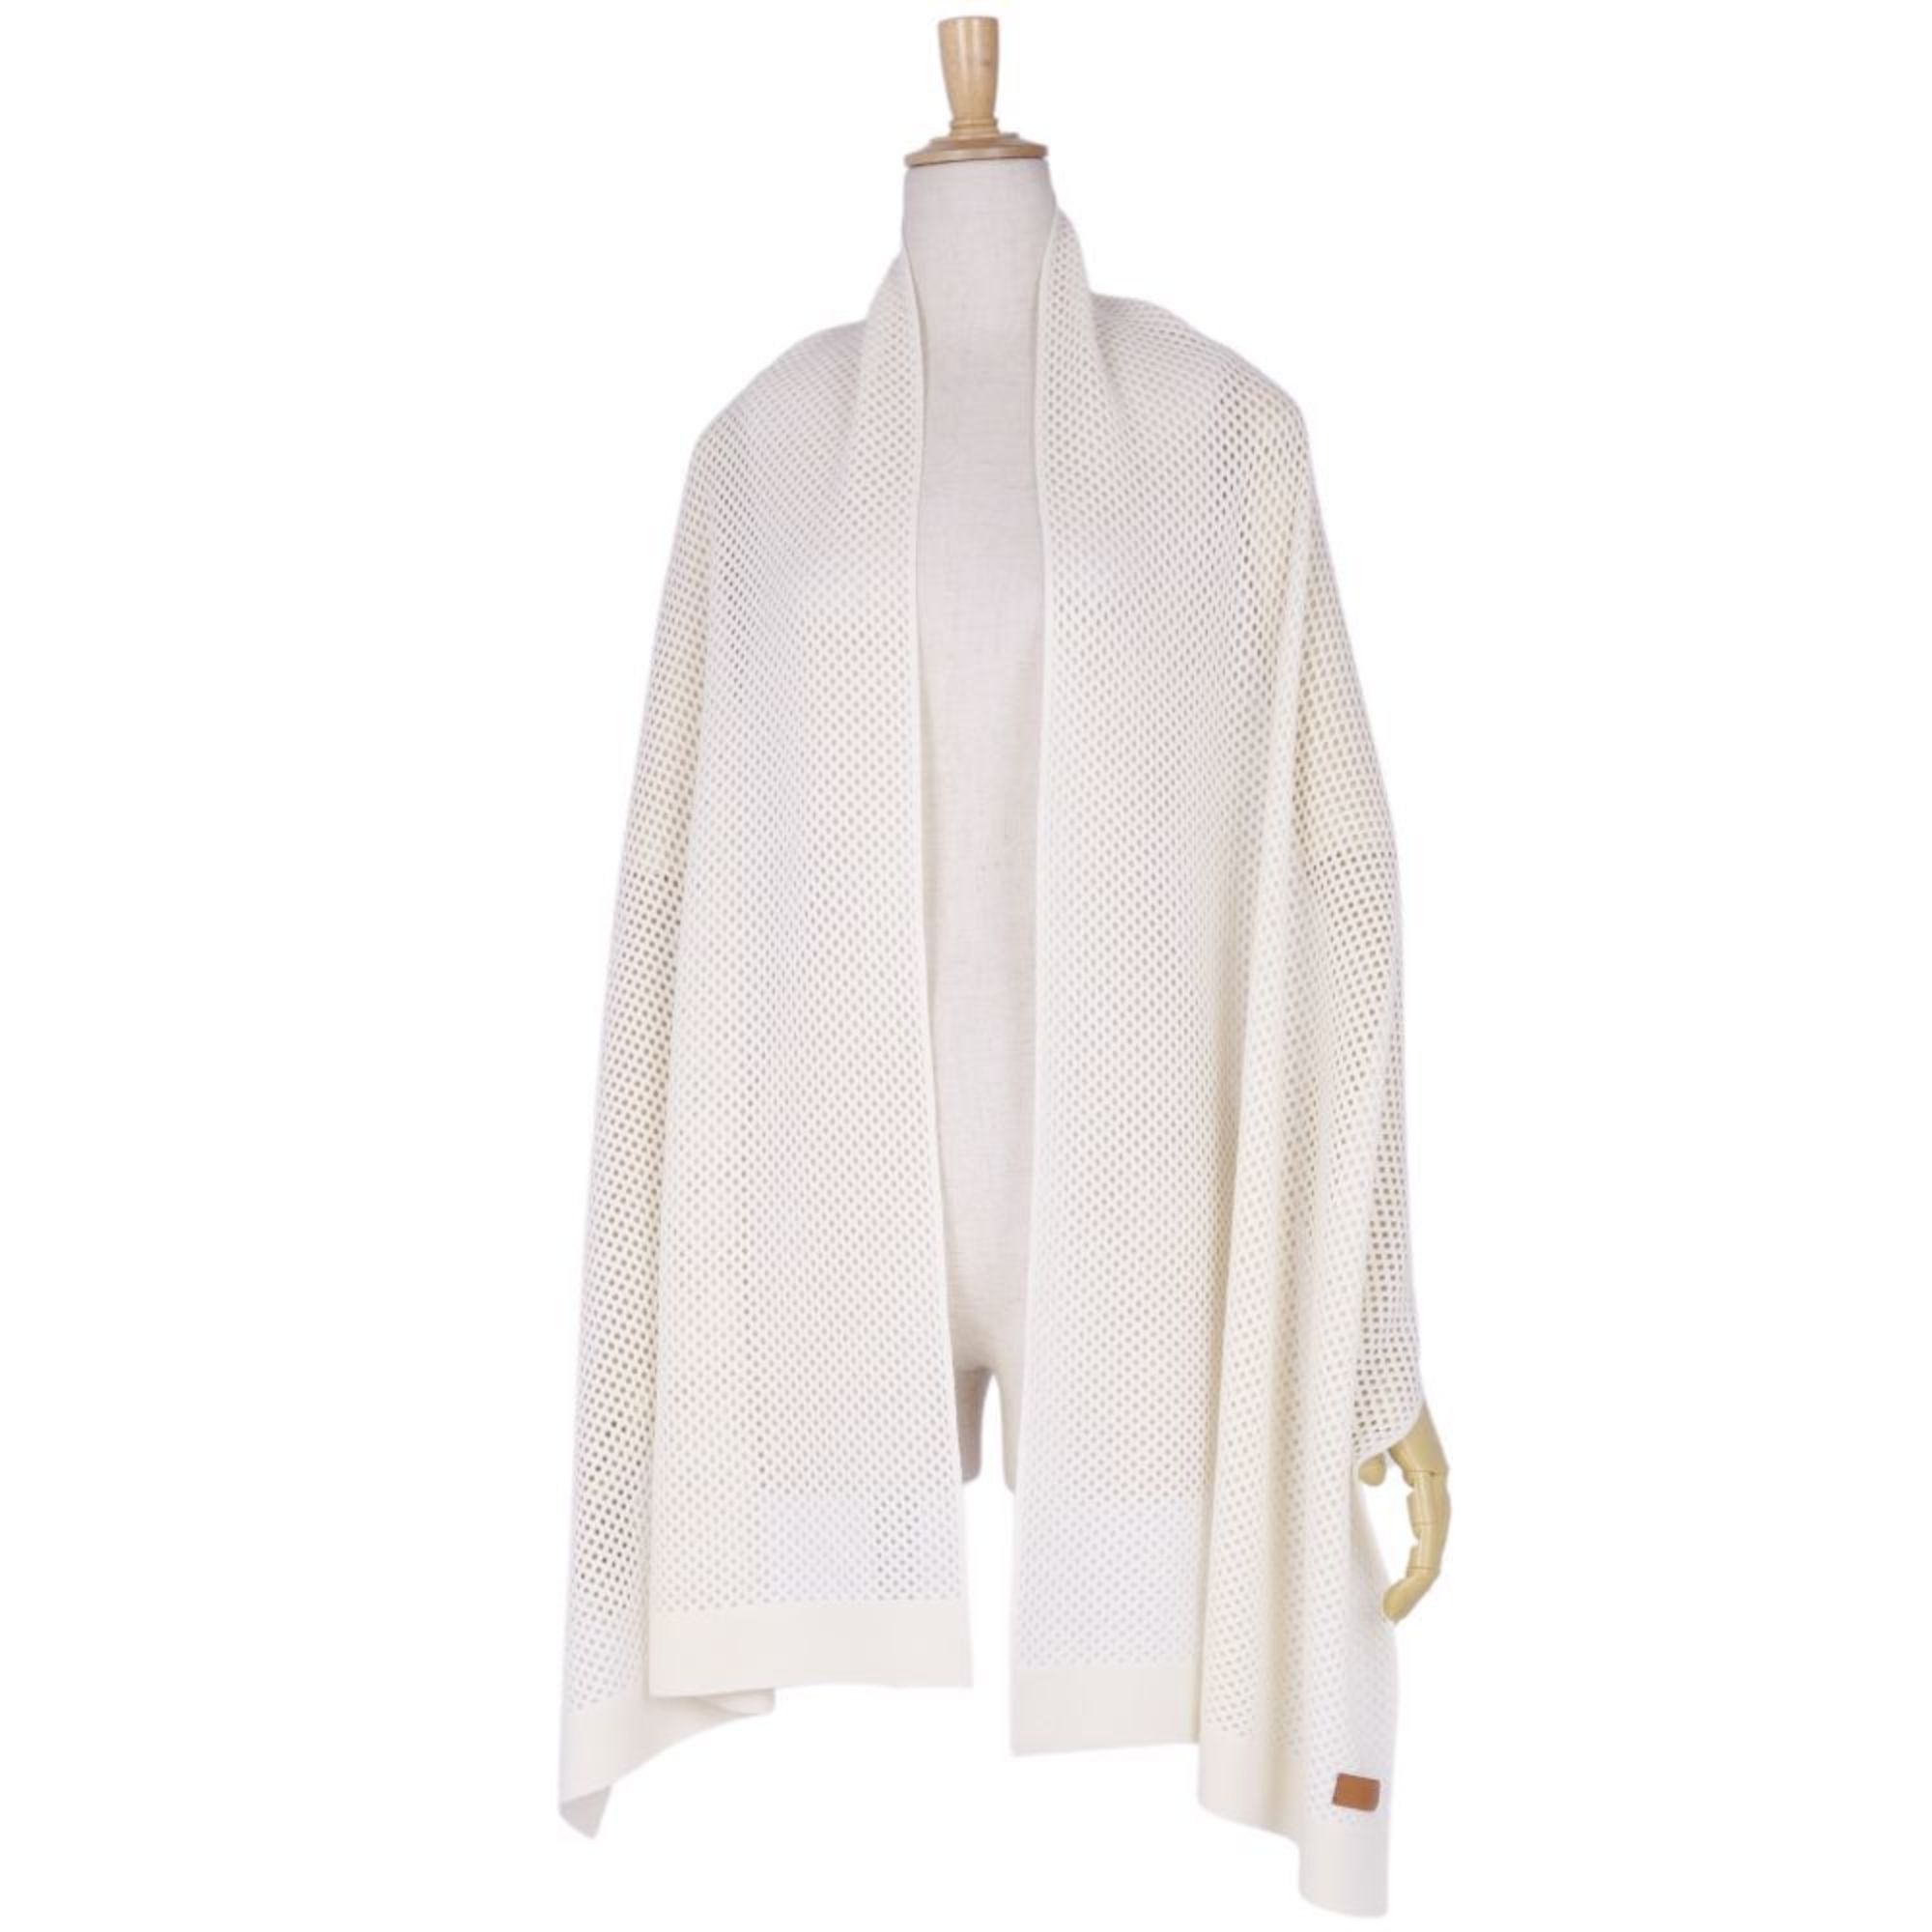 HERMES Muffler 23SS Maille Fillet Stole 100% Cashmere Lamb Leather Ladies Yvoir (White)